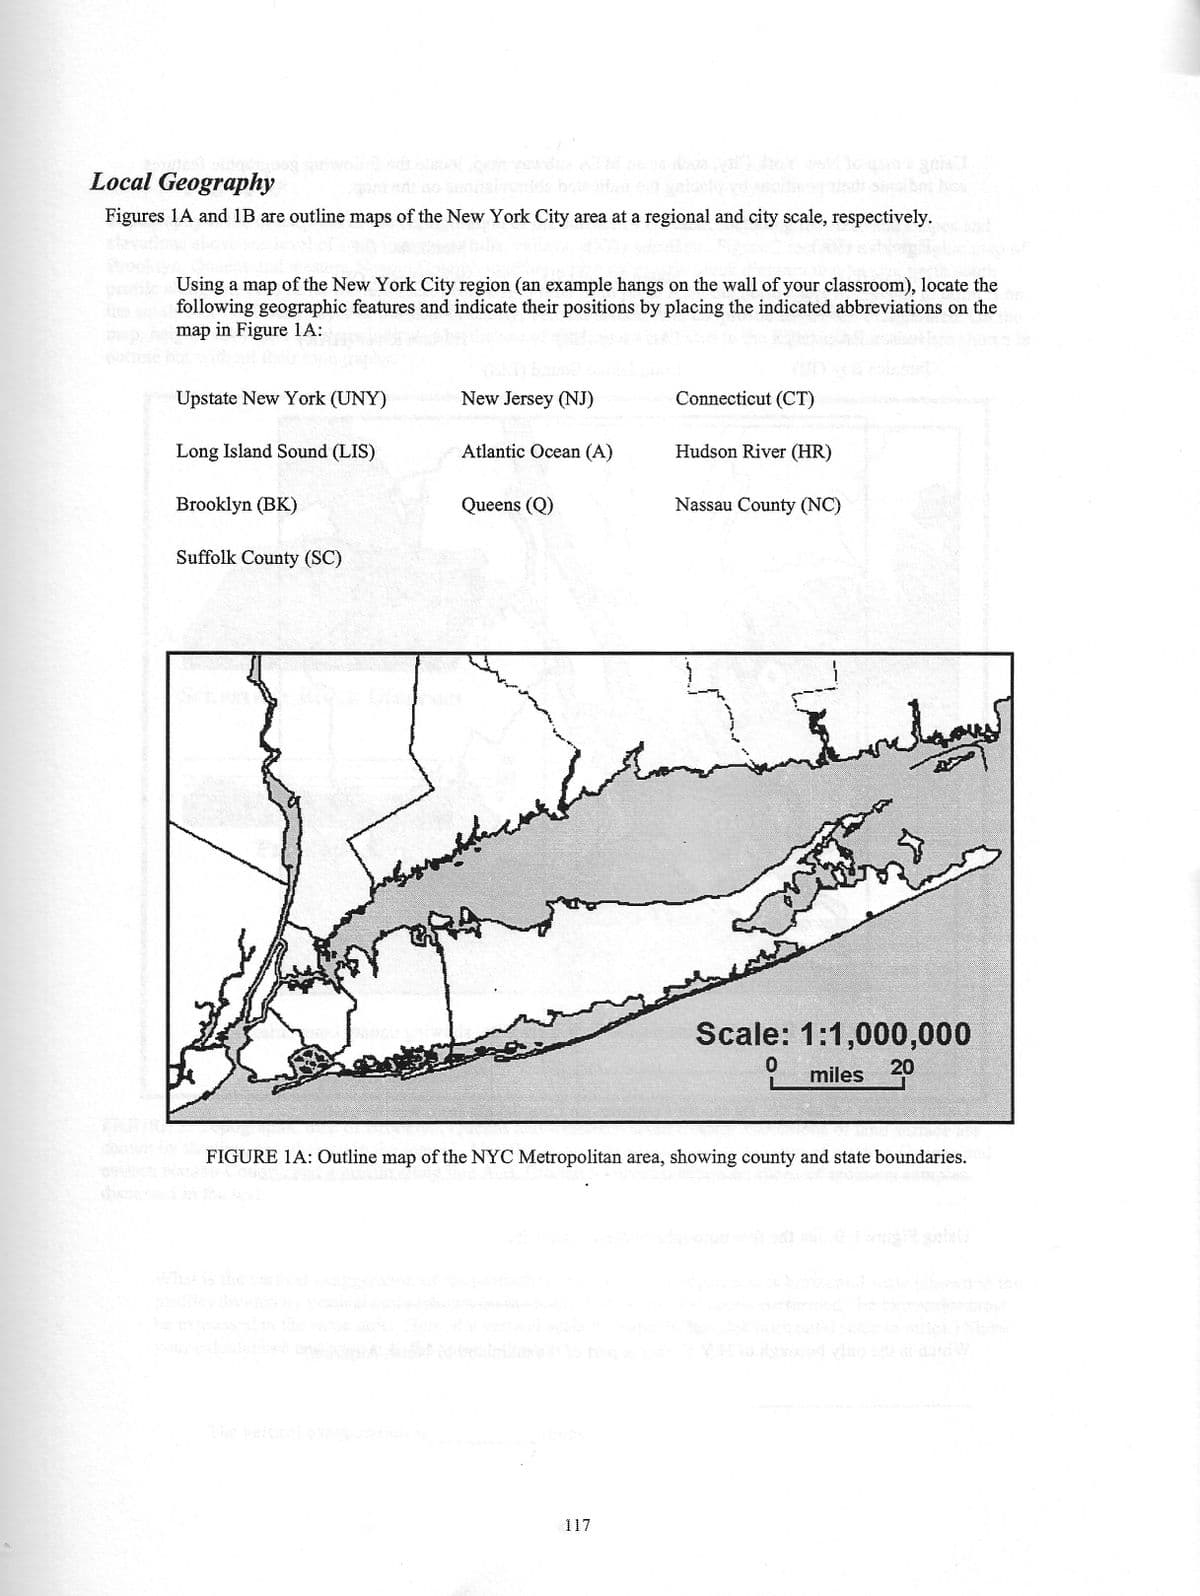 Local Geography
Figures 1A and 1B are outline maps of the New York City area at a regional and city scale, respectively.
profile Using a map of the New York City region (an example hangs on the wall of your classroom), locate the
following geographic features and indicate their positions by placing the indicated abbreviations on the
map in Figure 1A:
Upstate New York (UNY)
Long Island Sound (LIS)
Brooklyn (BK)
Suffolk County (SC)
New Jersey (NJ)
Atlantic Ocean (A)
Queens (Q)
ferciale
Connecticut (CT)
117
Hudson River (HR)
Nassau County (NC)
كمال سمس
Scale: 1:1,000,000
0
20
miles
FIGURE 1A: Outline map of the NYC Metropolitan area, showing county and state boundaries.